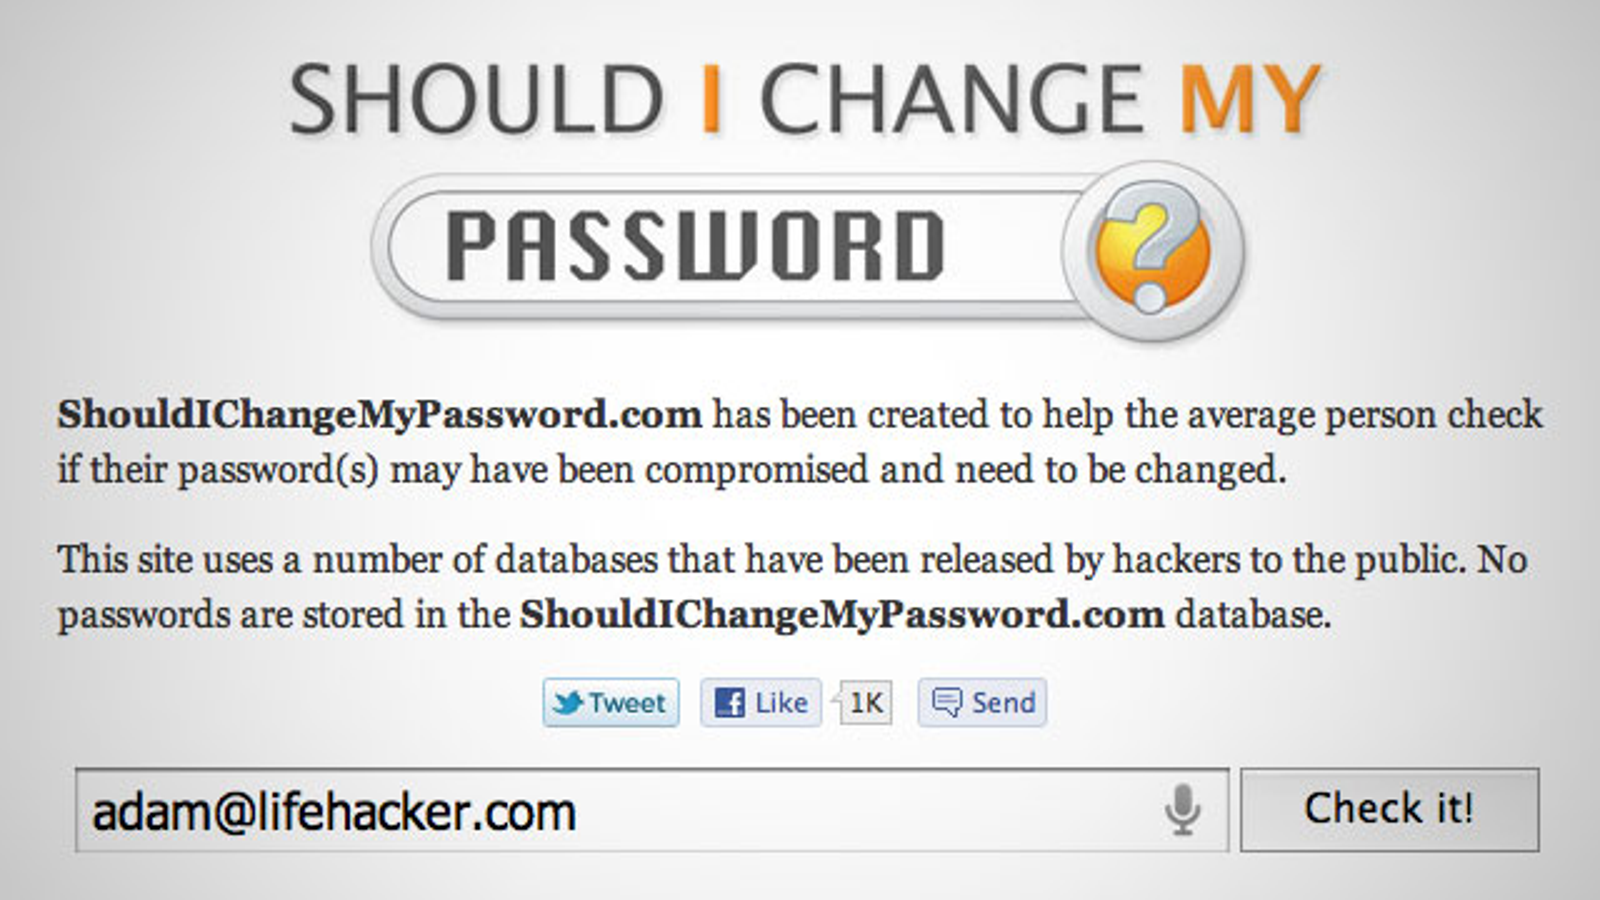 detect compromised passwords